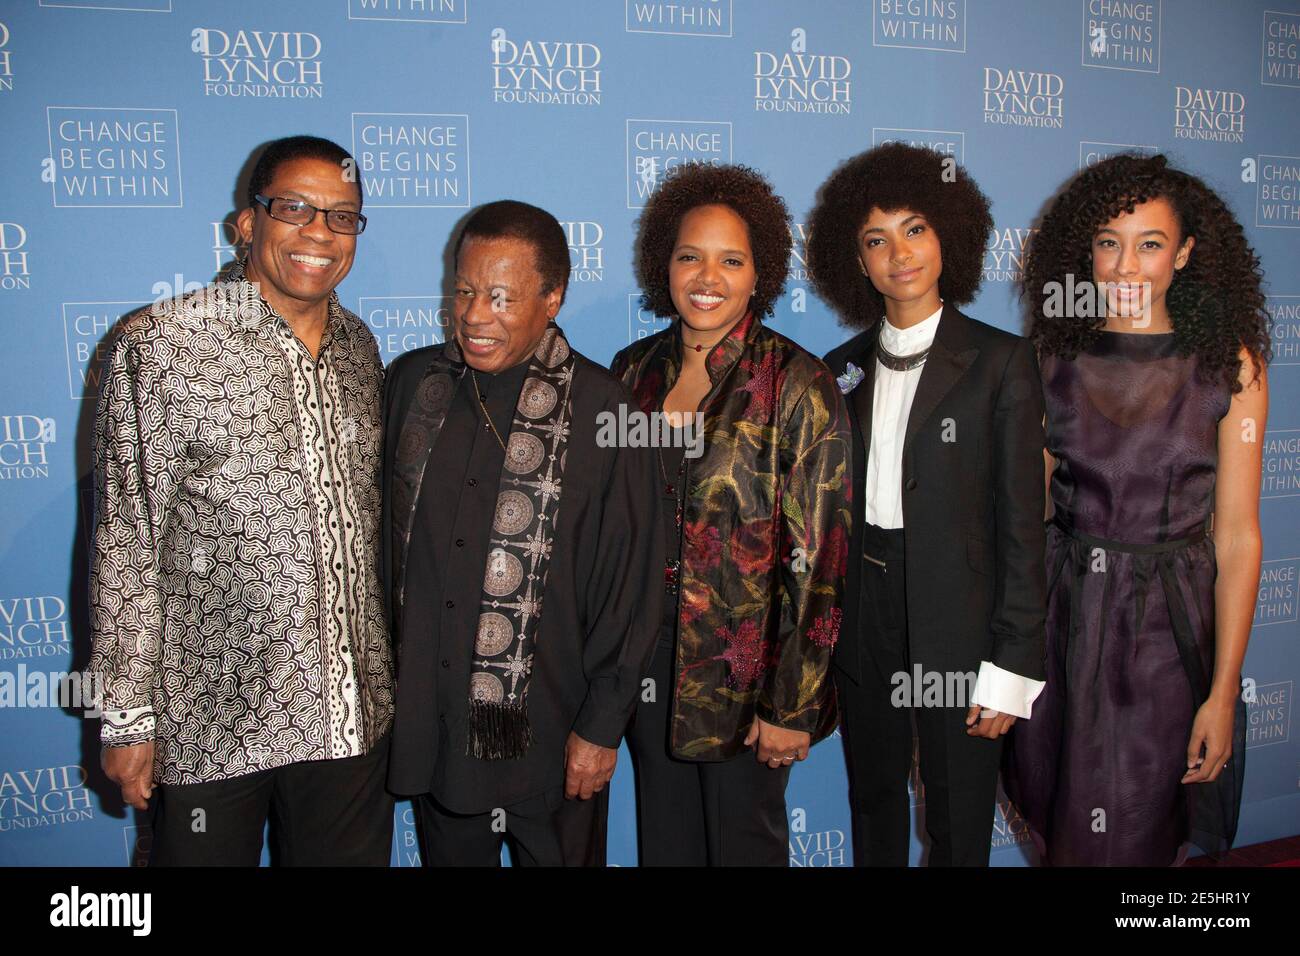 (L-R) Musicians Herbie Hancock, Wayne Shorter, Terri Lyne Carrington, Esperanza Spalding and Corinne Bailey Rae attend the 'Change Begins Within: An Historic Night of Jazz to benefit The David Lynch Foundation' event in New York December 13, 2012. REUTERS/Andrew Kelly (UNITED STATES - Tags: ENTERTAINMENT) Stock Photo